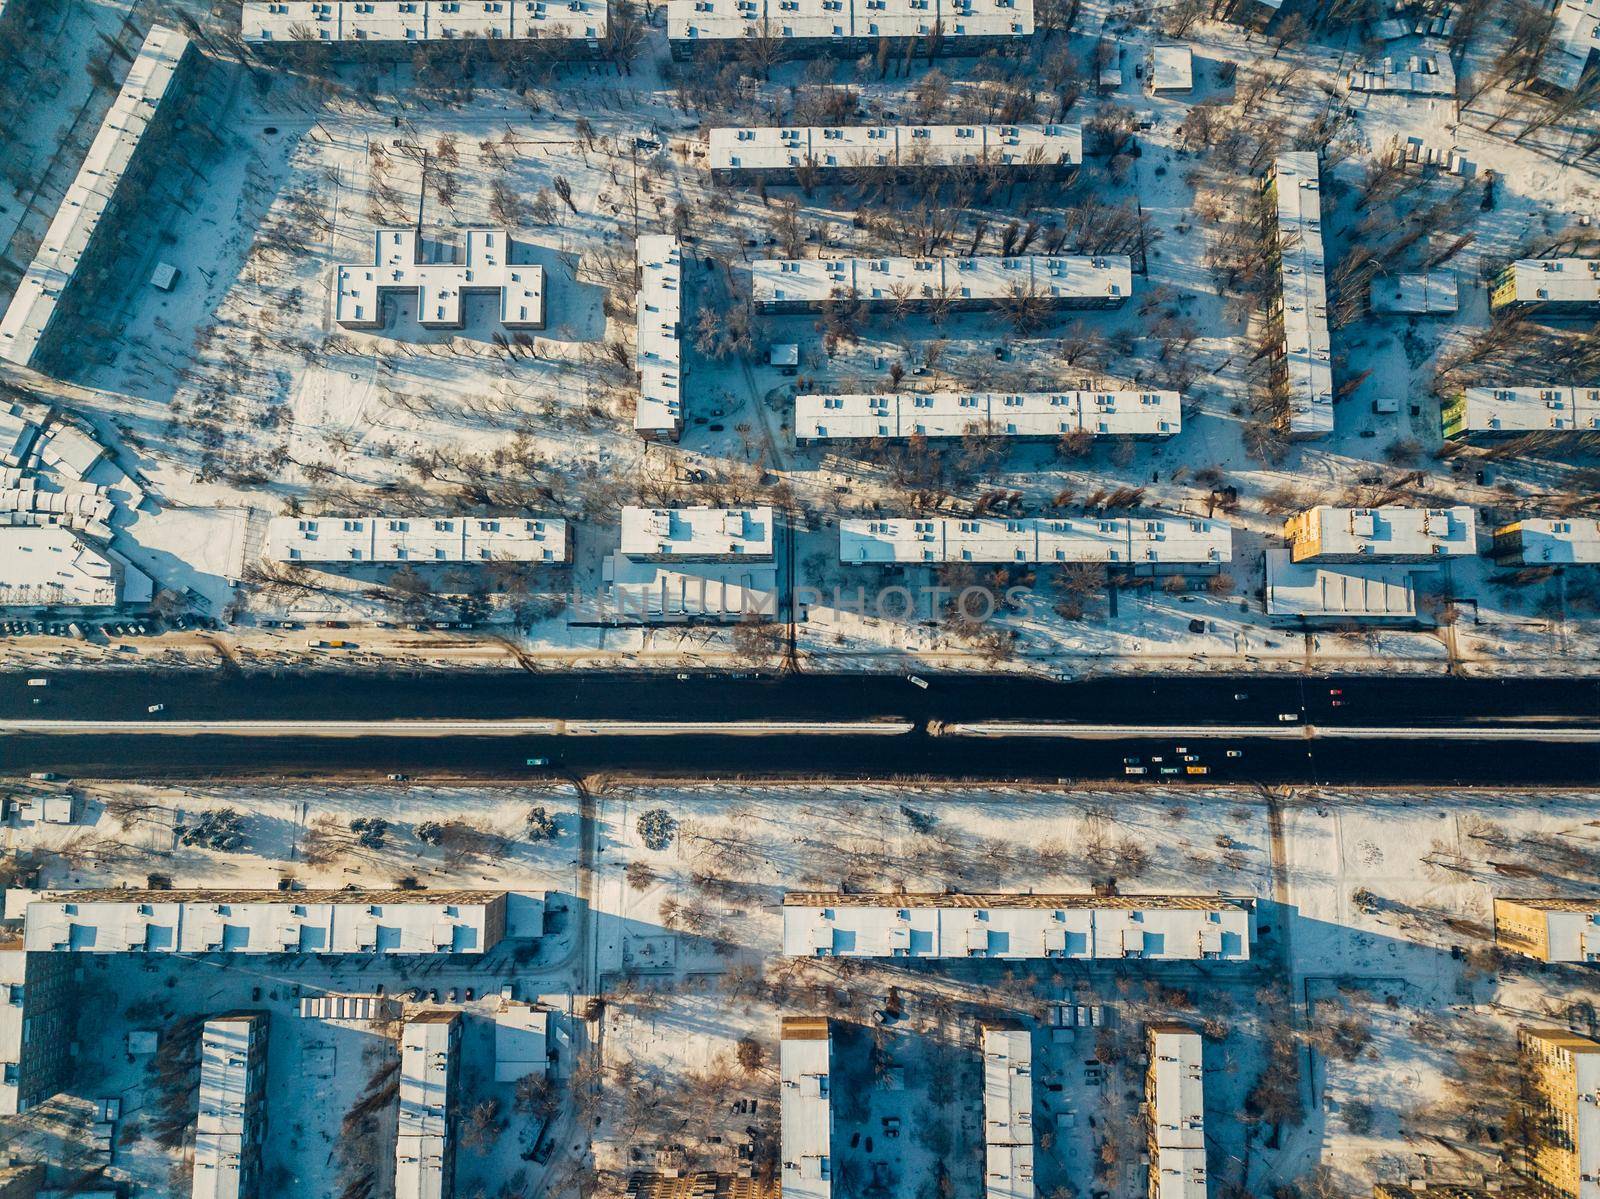 Aerial view of a freeway intersection Snow-covered in winter. by mosfet_ua